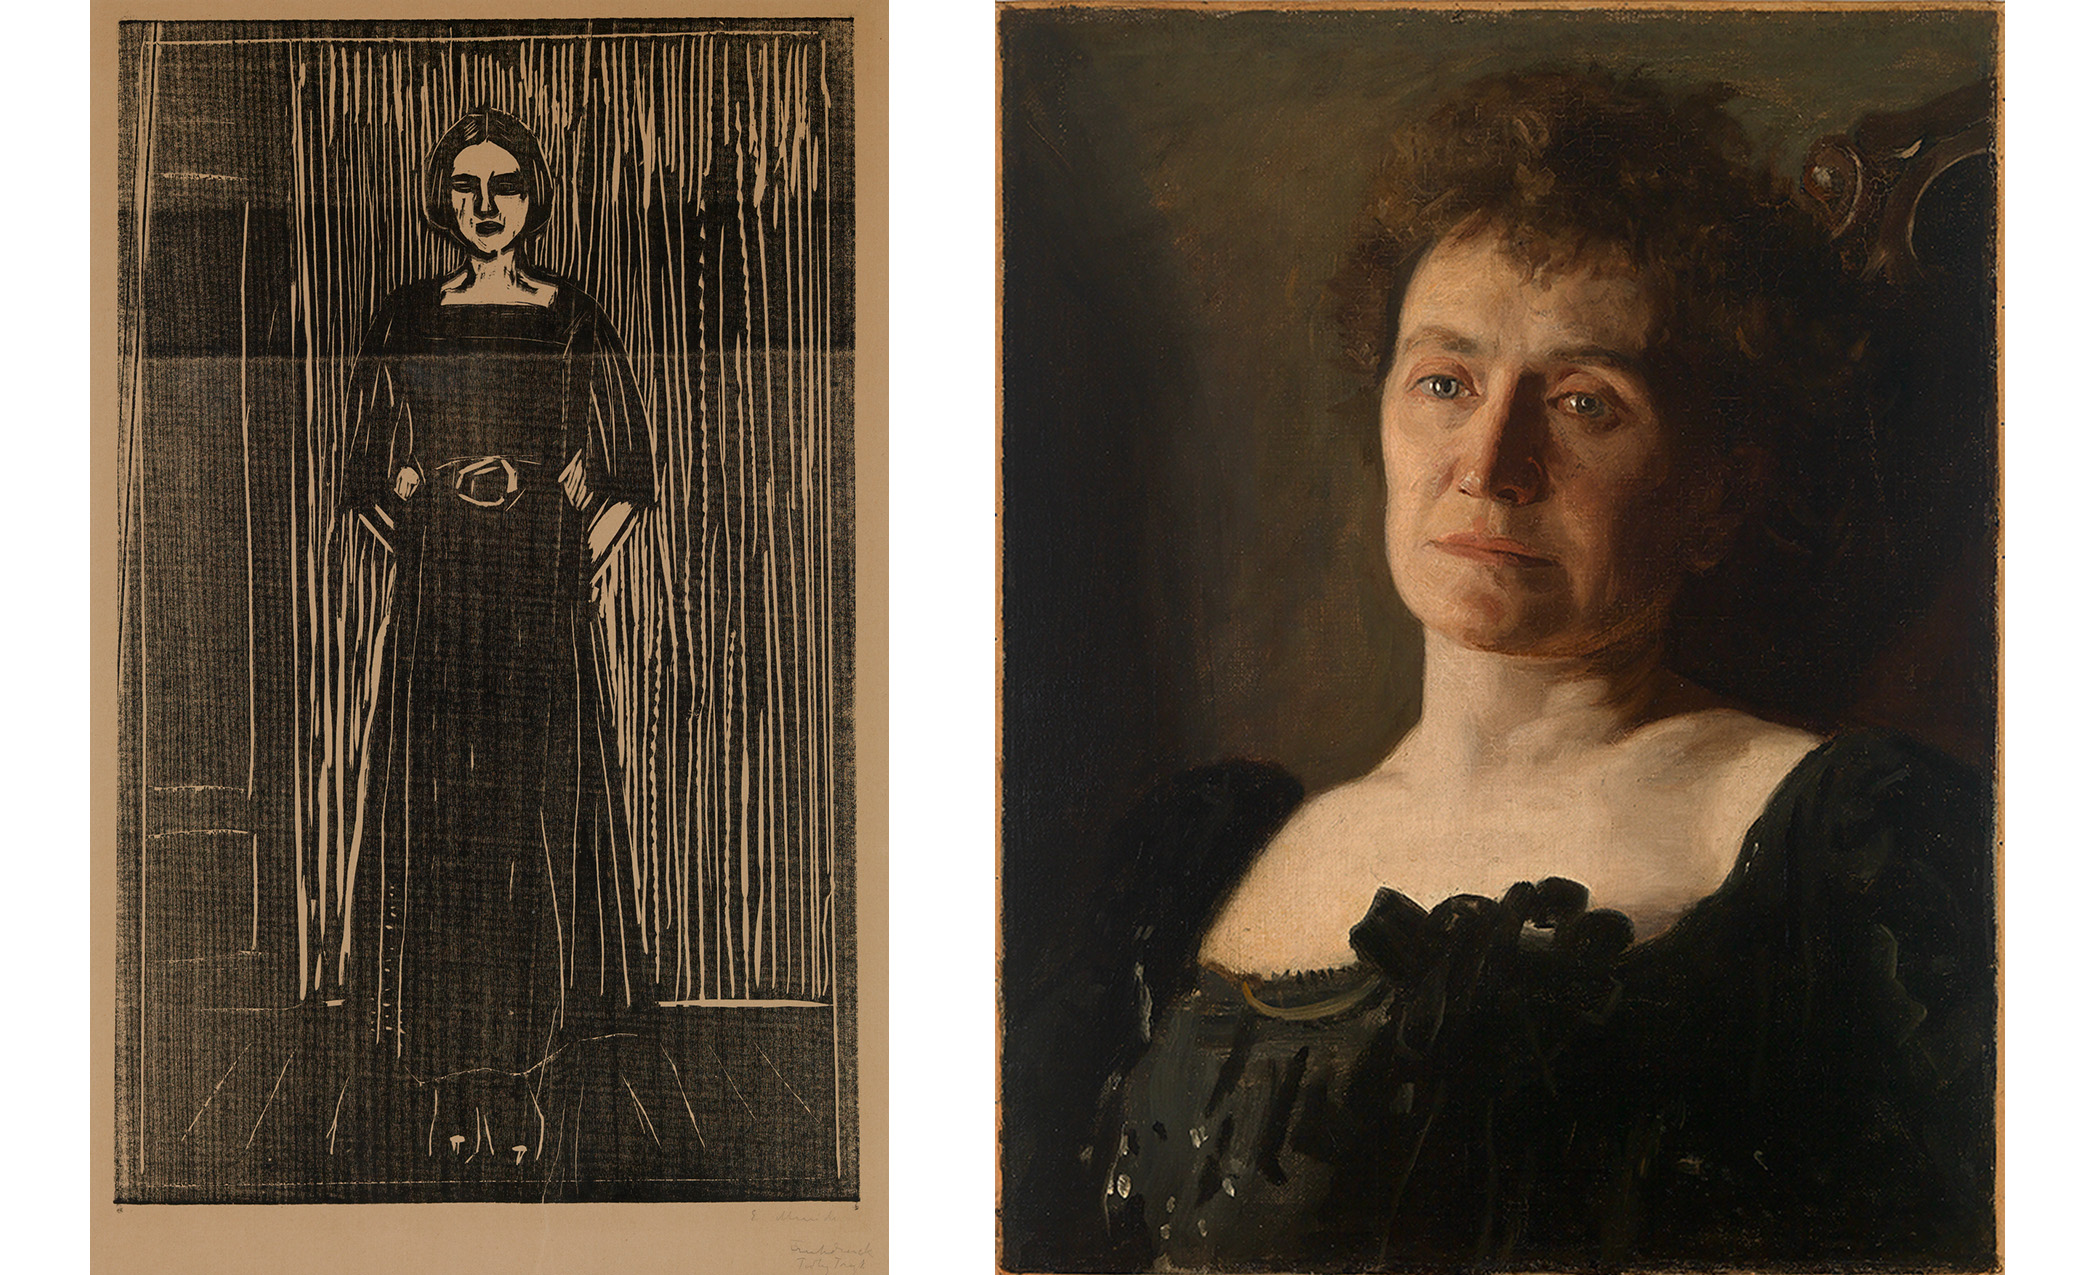 left: woman with straight dark hair tied behind head, parted at center, wearing dark square necked dress with beld standing with hands behind back and feet together on wood floor near wall wiht door visible at her proper right. right: bust portrait of a middle aged woman turned one-quarter toward her proper right, head slightly toward proper left, with brown hair, wearing dark square necked dress, leaning against plain wall